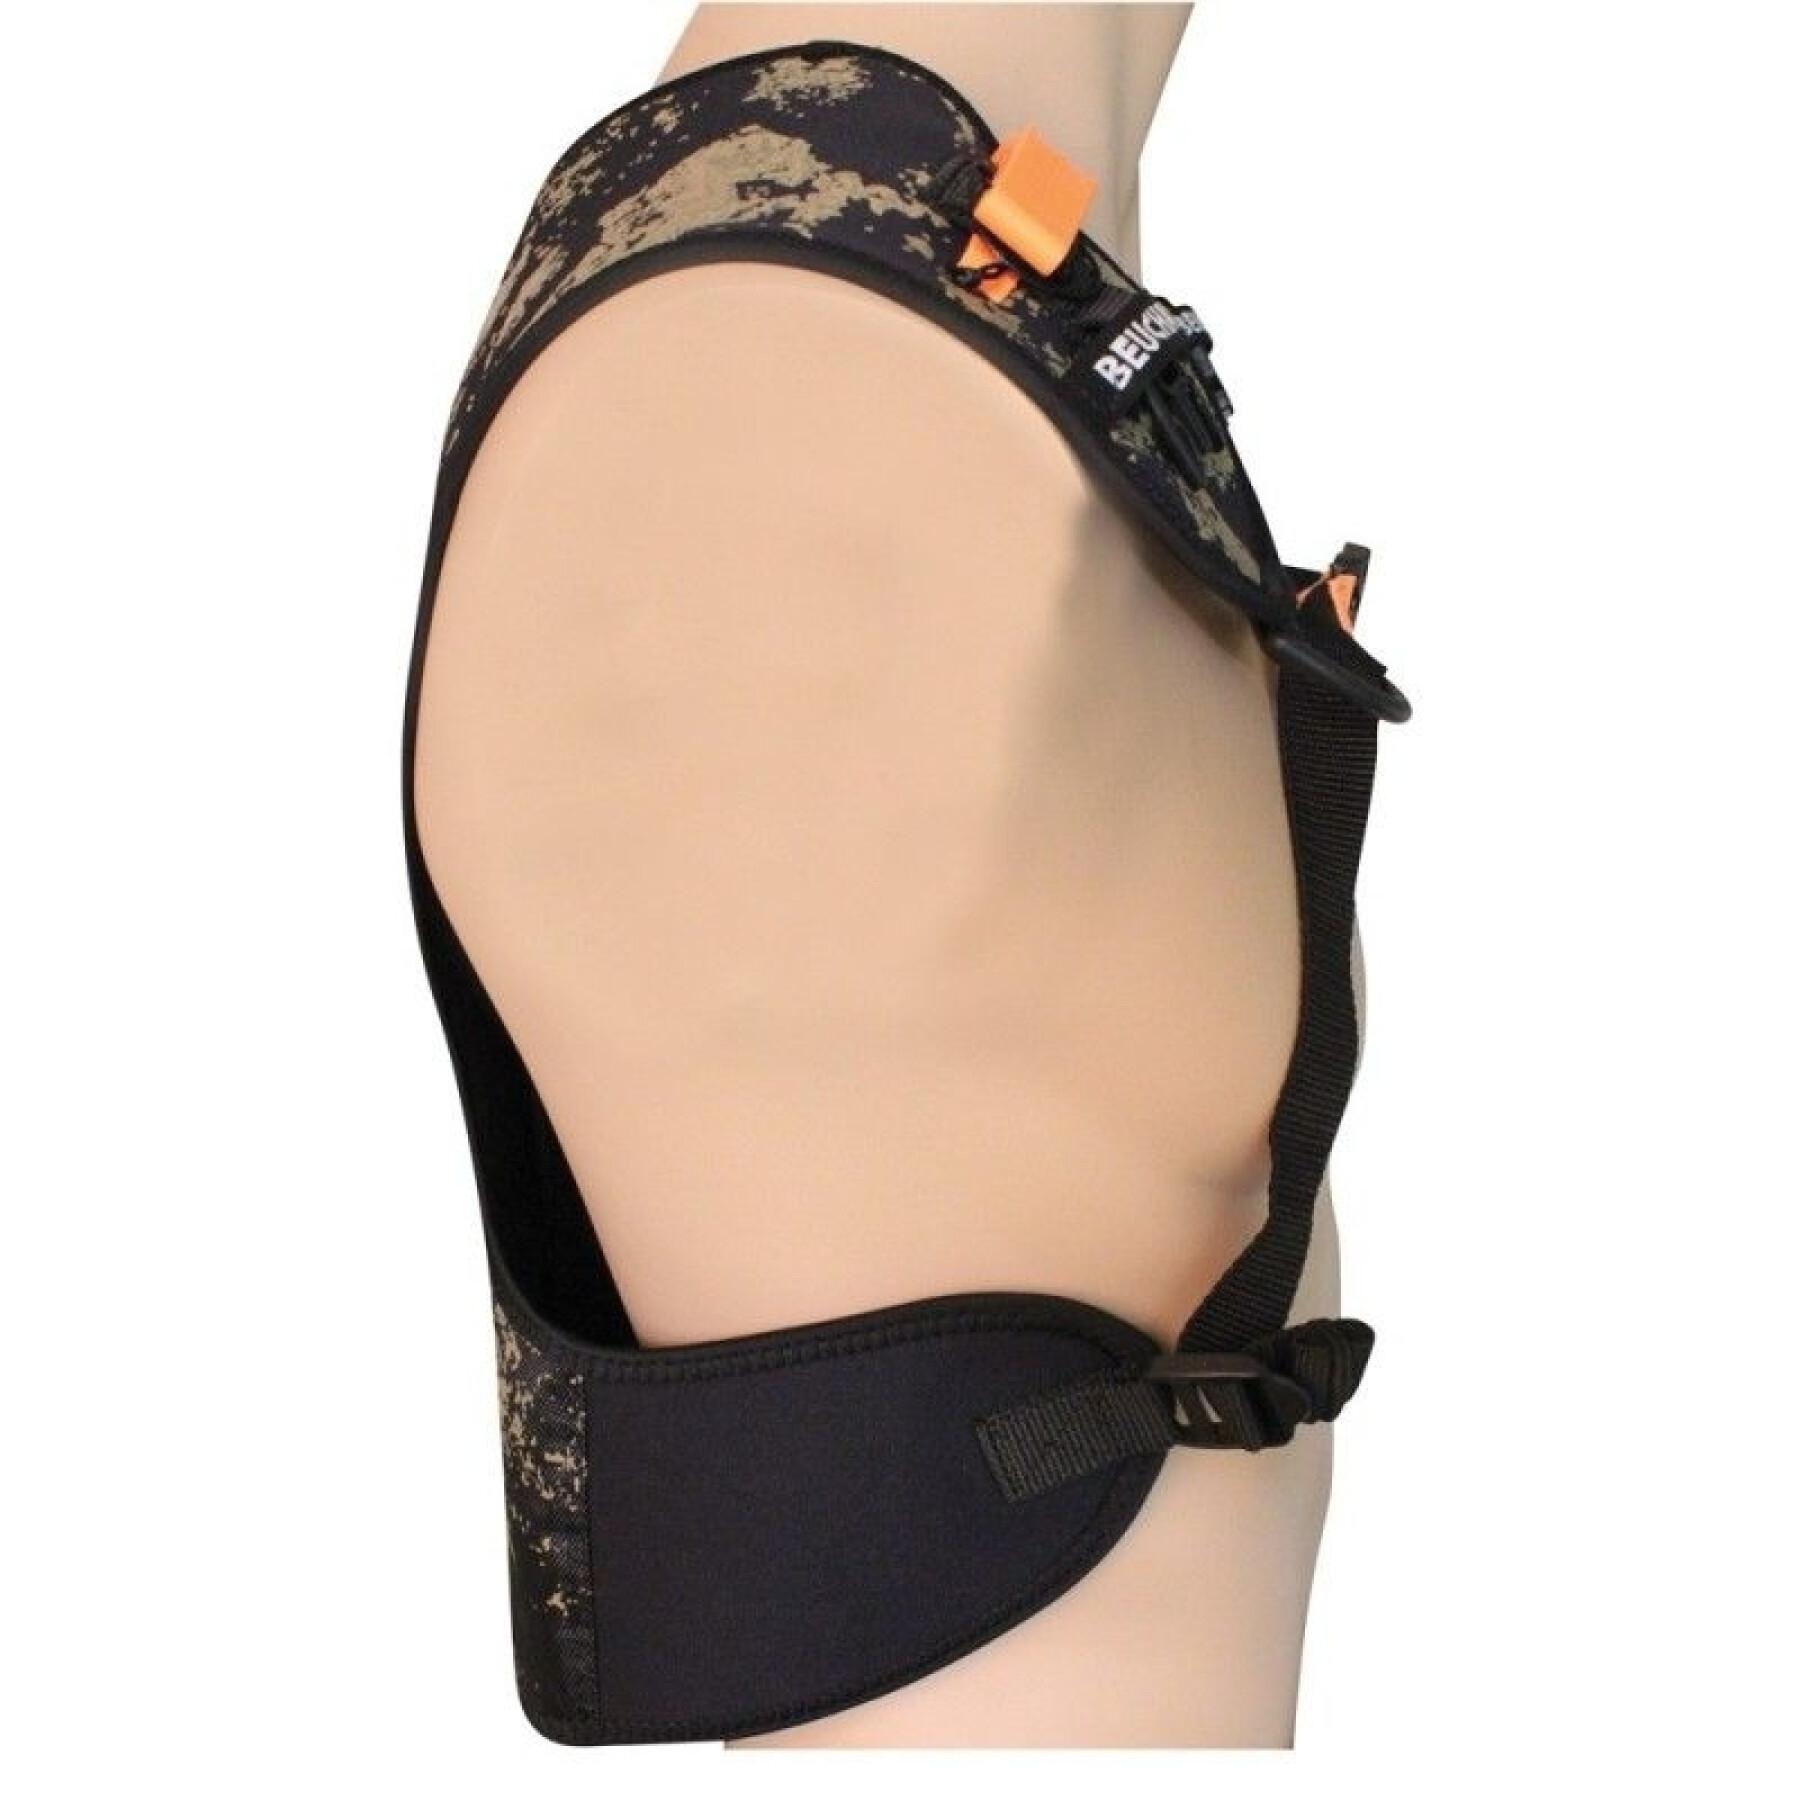 Harness with release system rapide Beuchat